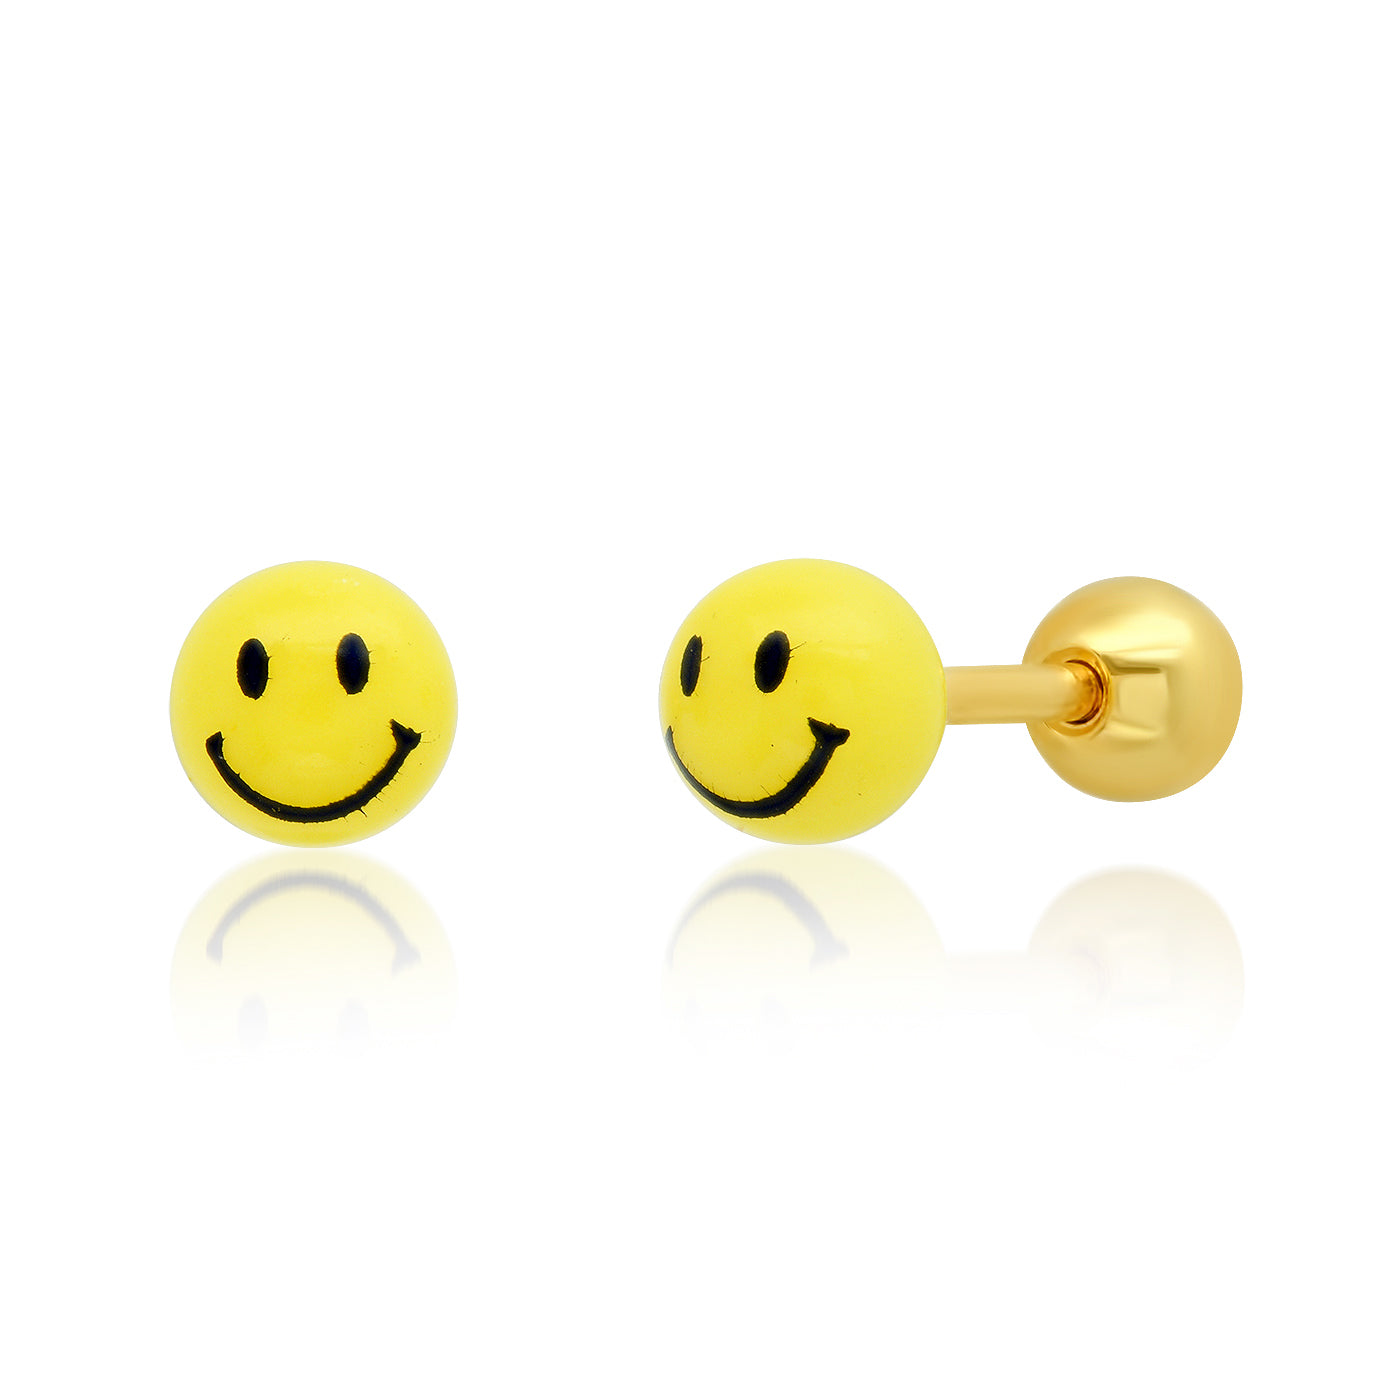 Tai Smiley Face Studs with Piercing Screw Back